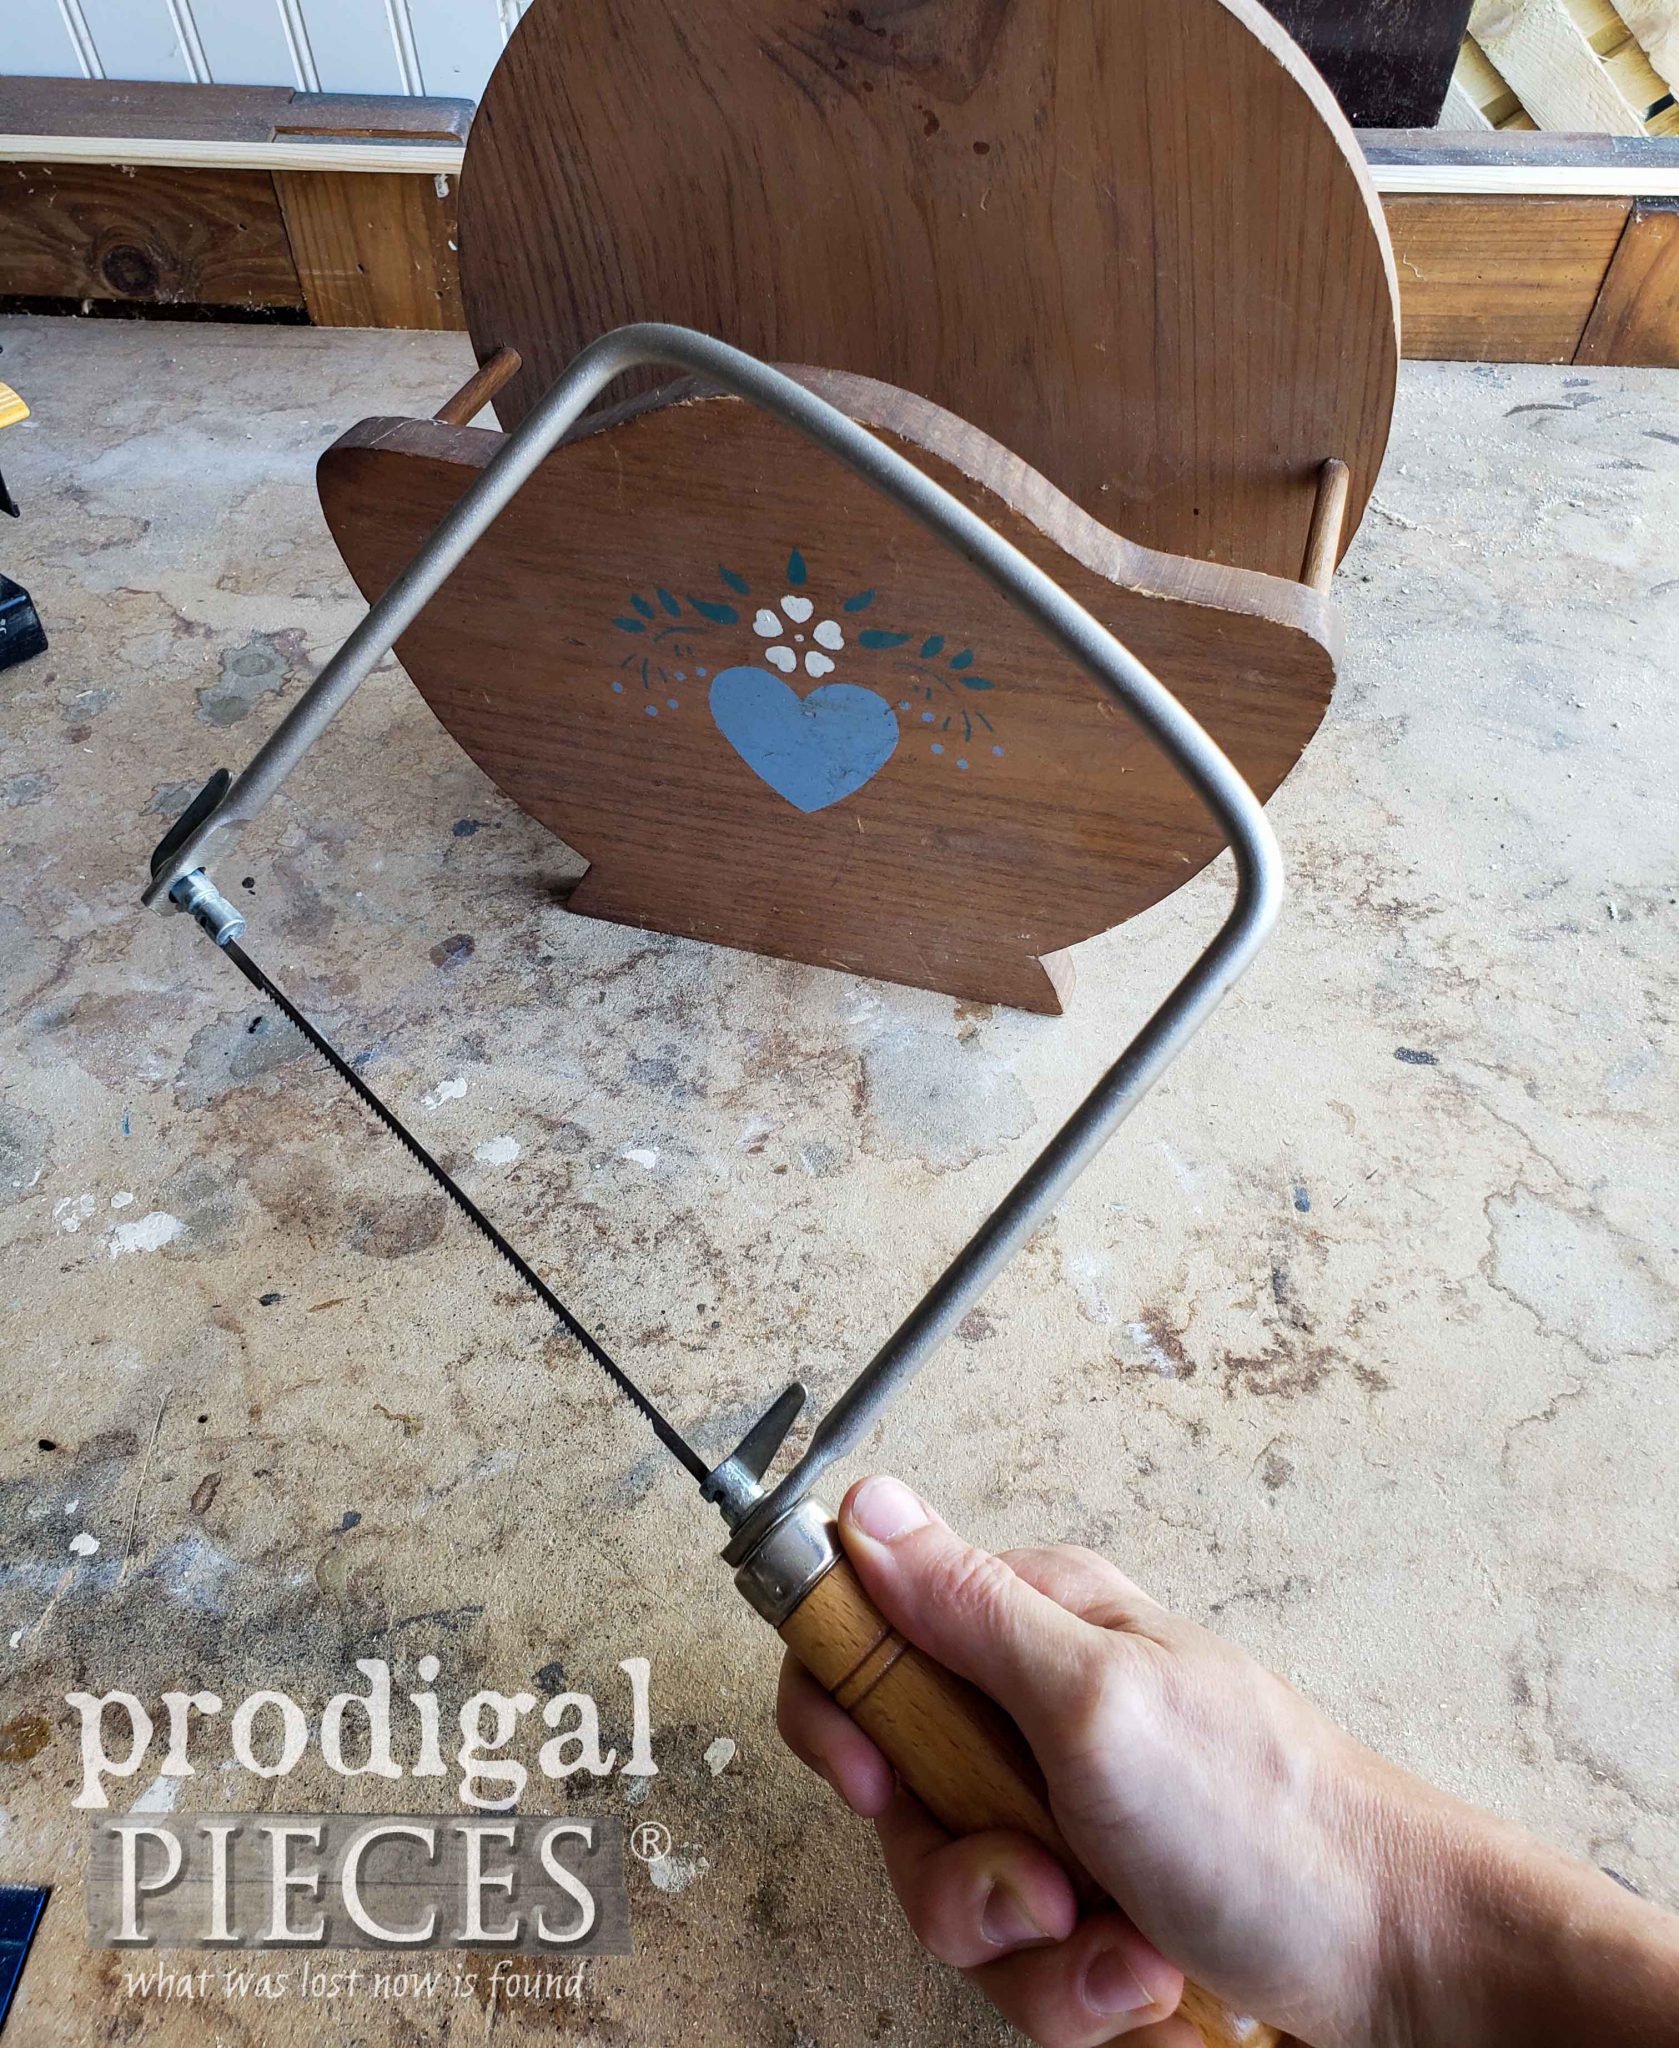 A simple coping saw can do mighty jobs | prodigalpieces.com